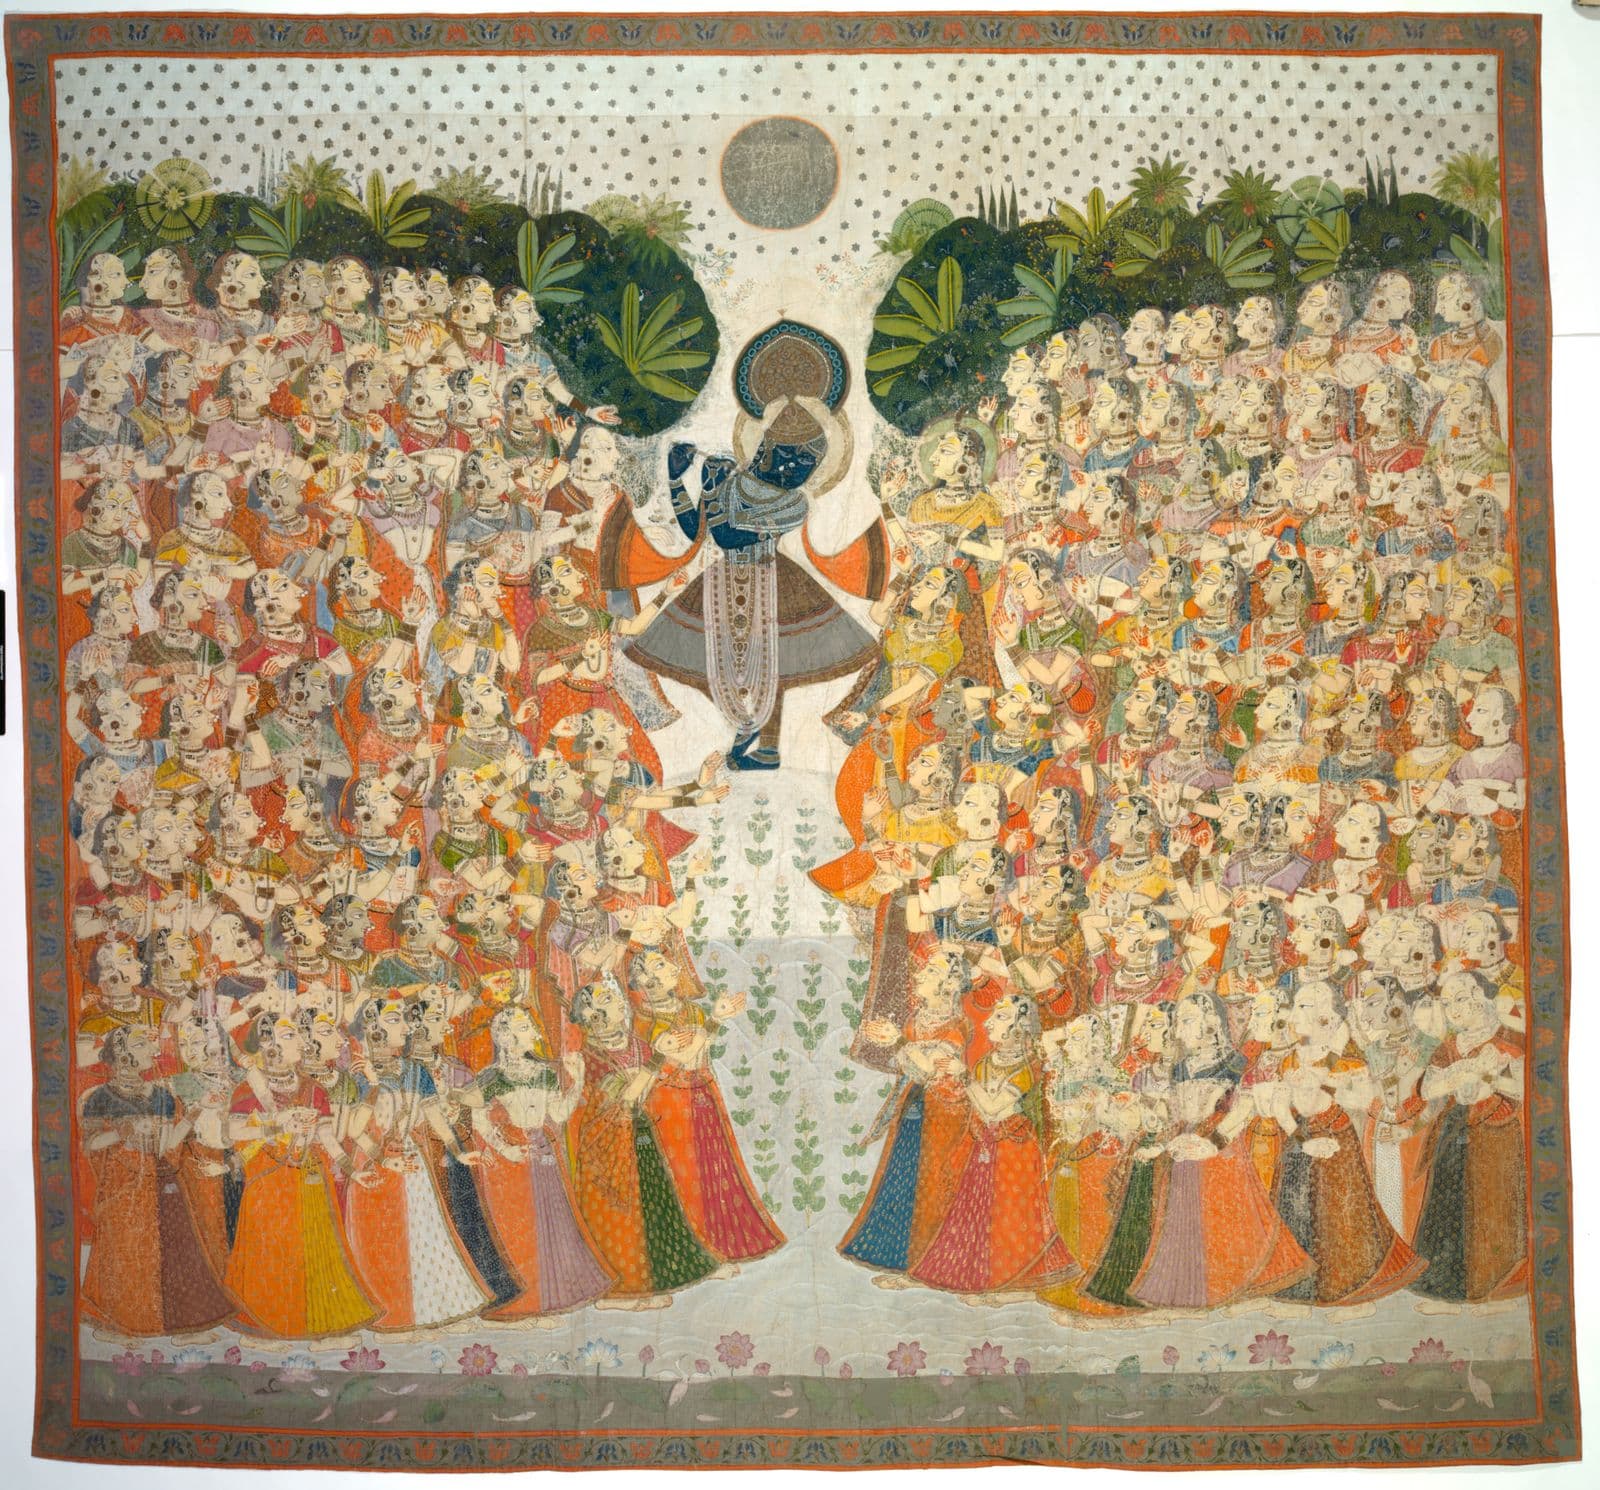 A central blue figure, Krishna, plays the flute as he is surrounded by people in multicoloured clothing